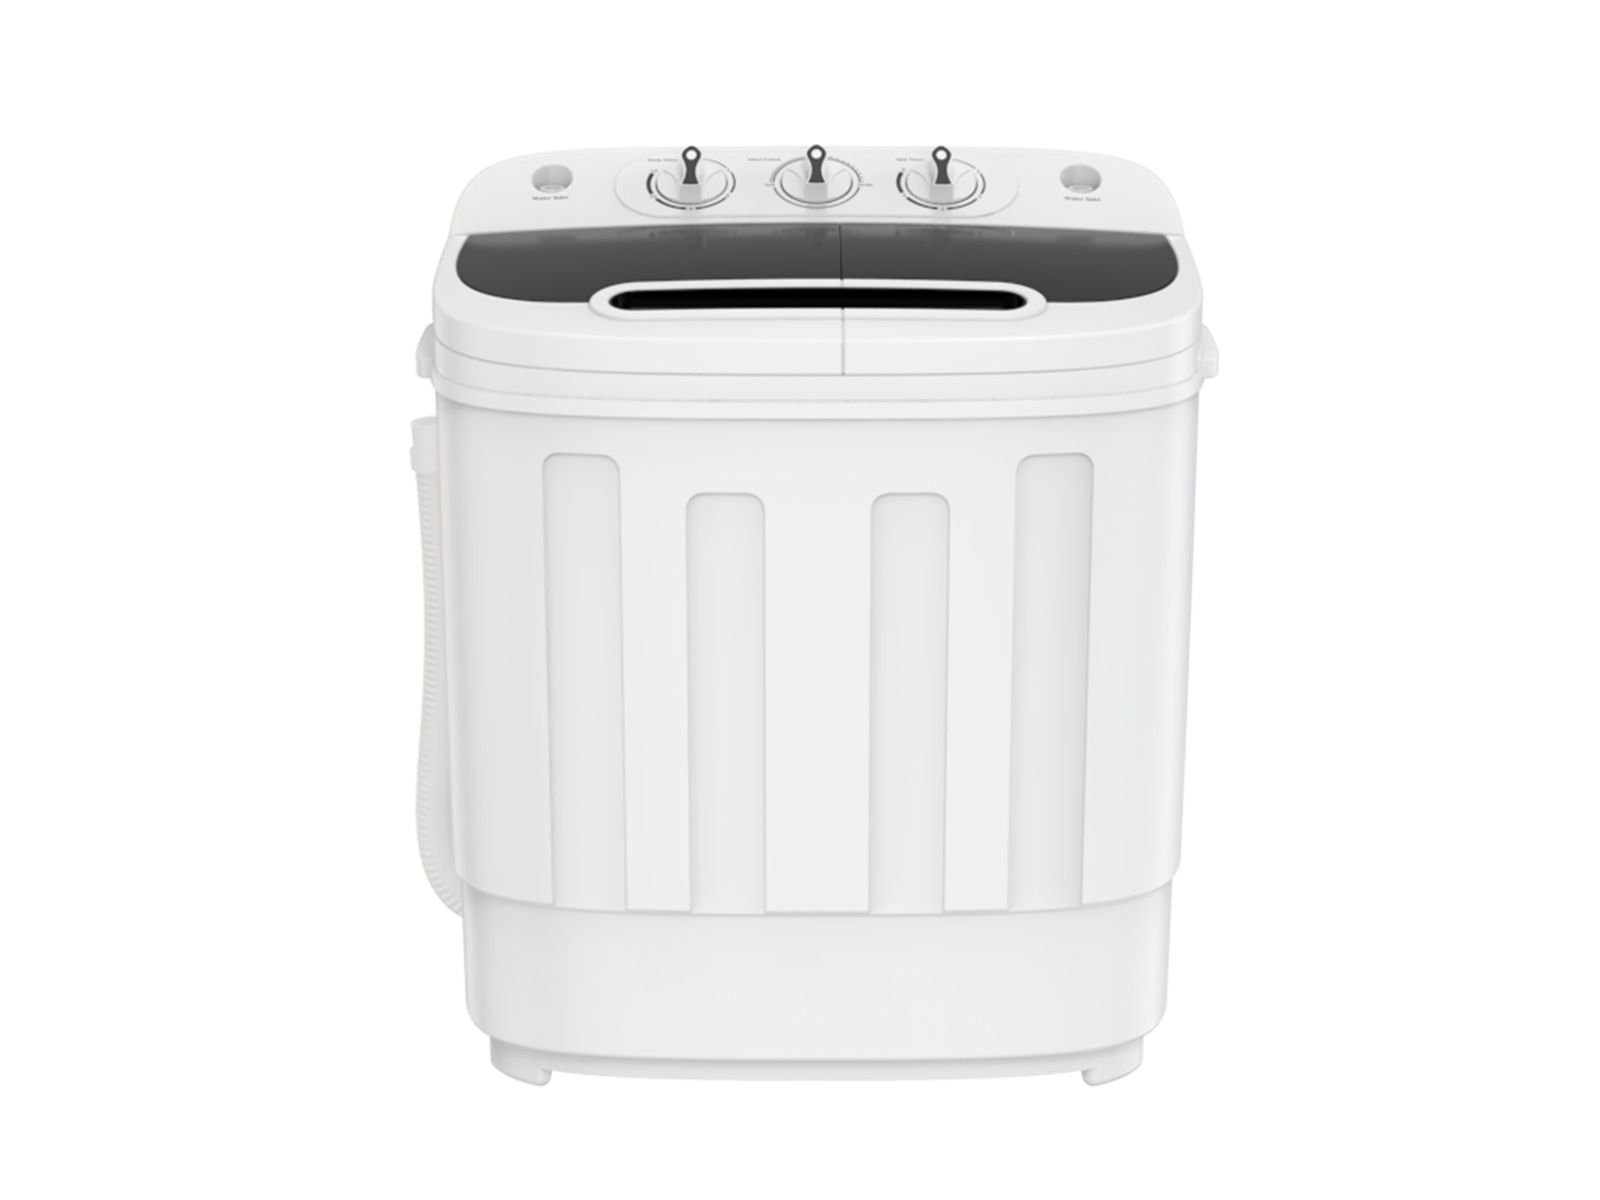 ZENSTYLE Twin Tub Portable Compact Wash Machine Spin Dry Cycle 13lbs  Semi-Automatic Home Mini Washer, White